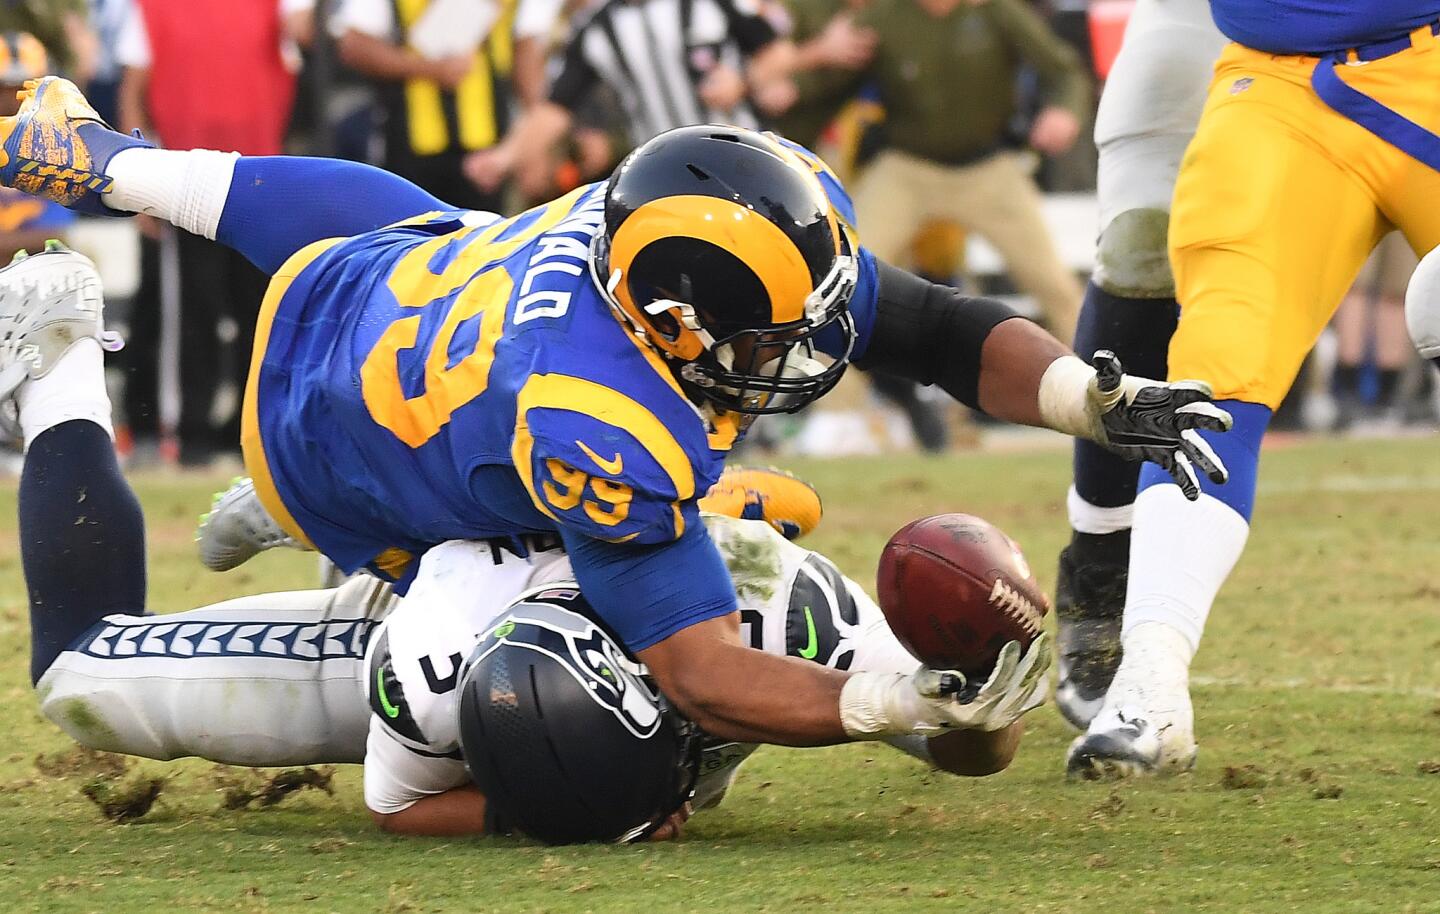 Rams' Aaron Donald falls on Seattle Seahawks quarterback Russell Wilson while trying to recover a fumble in the fourth quarter at the Coliseum on Sunday.